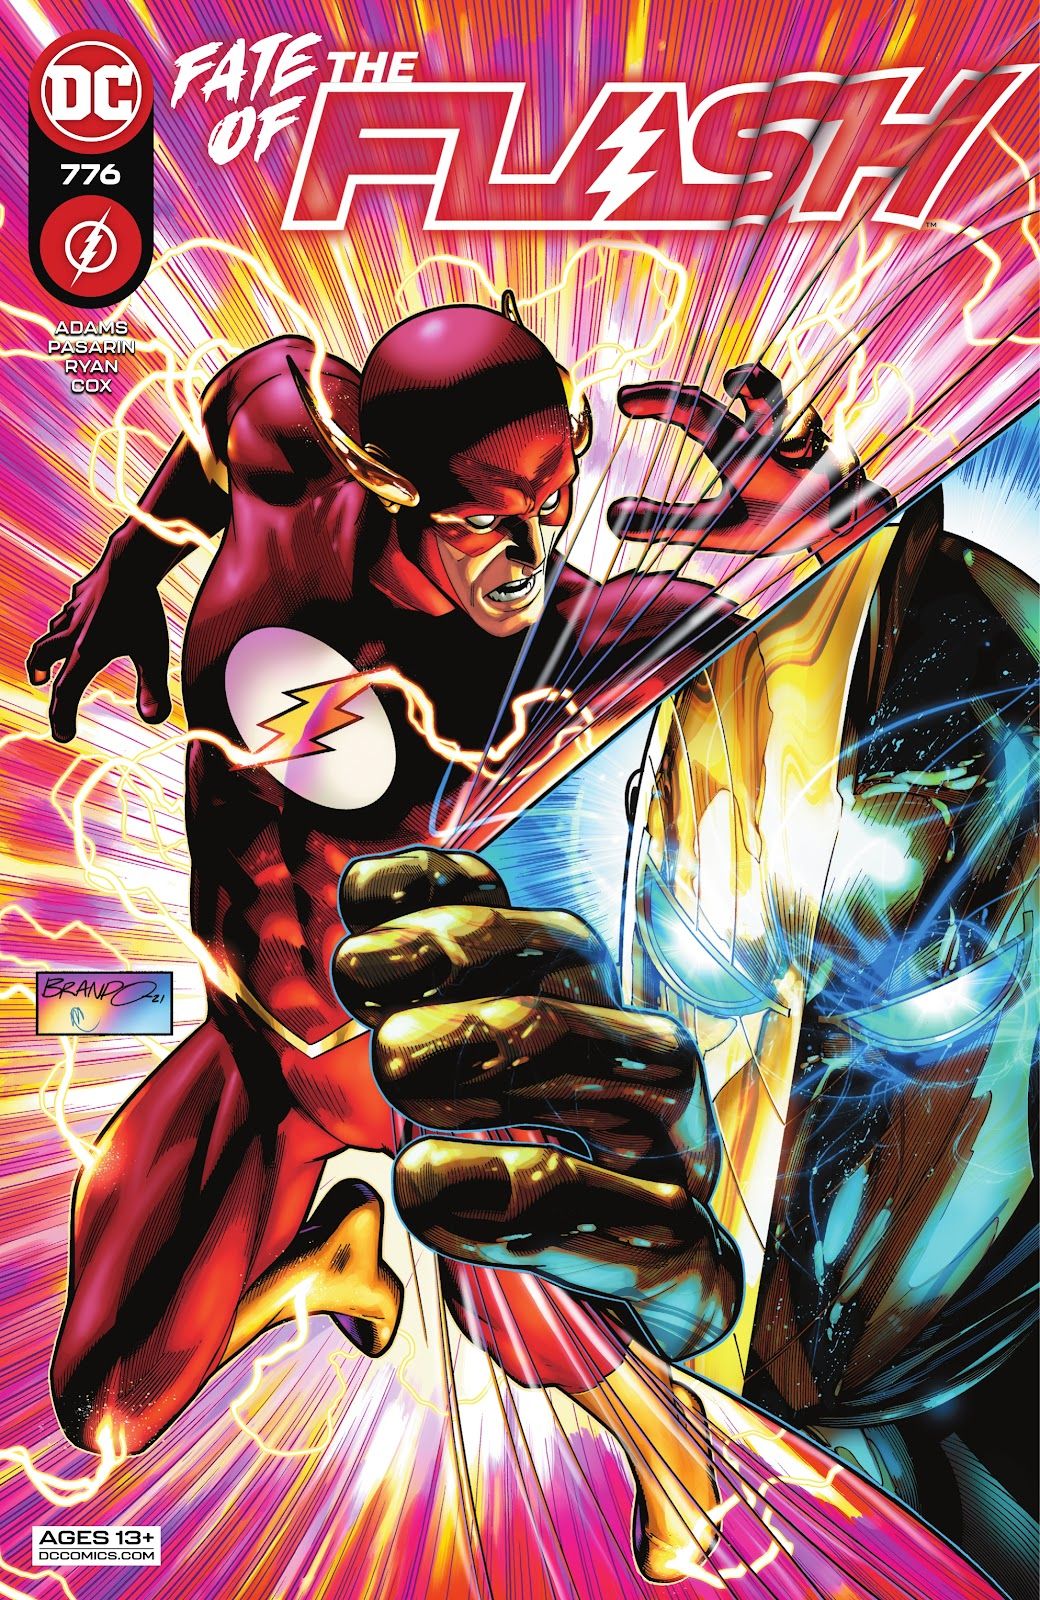 DC's The Scarlet Speedster Needs Your Help in The Flash #776 - Review